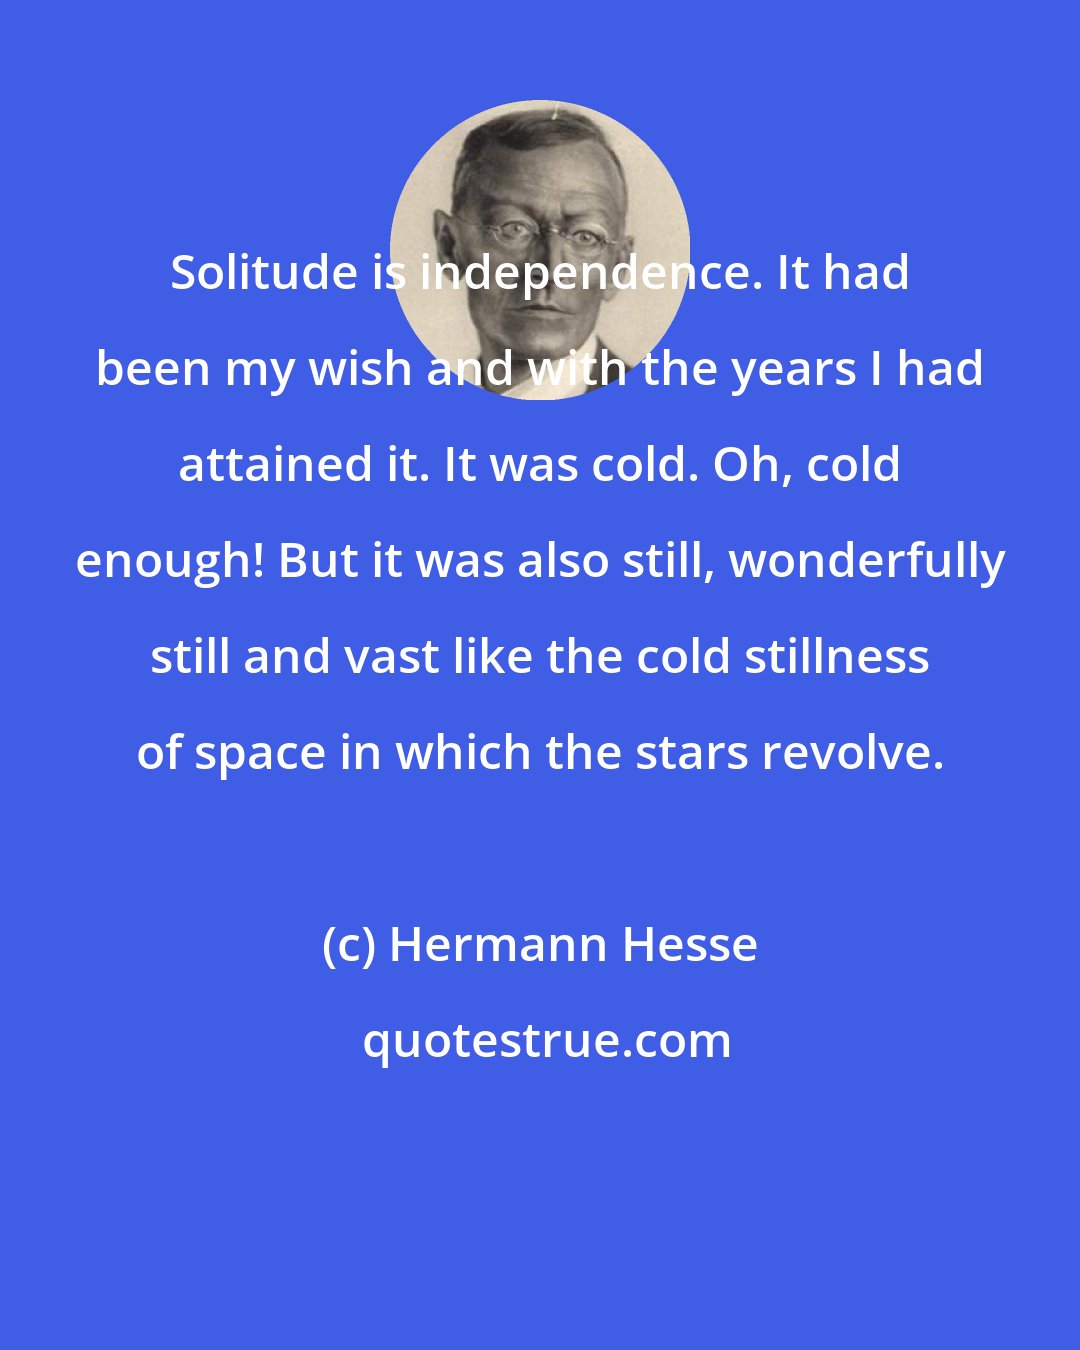 Hermann Hesse: Solitude is independence. It had been my wish and with the years I had attained it. It was cold. Oh, cold enough! But it was also still, wonderfully still and vast like the cold stillness of space in which the stars revolve.